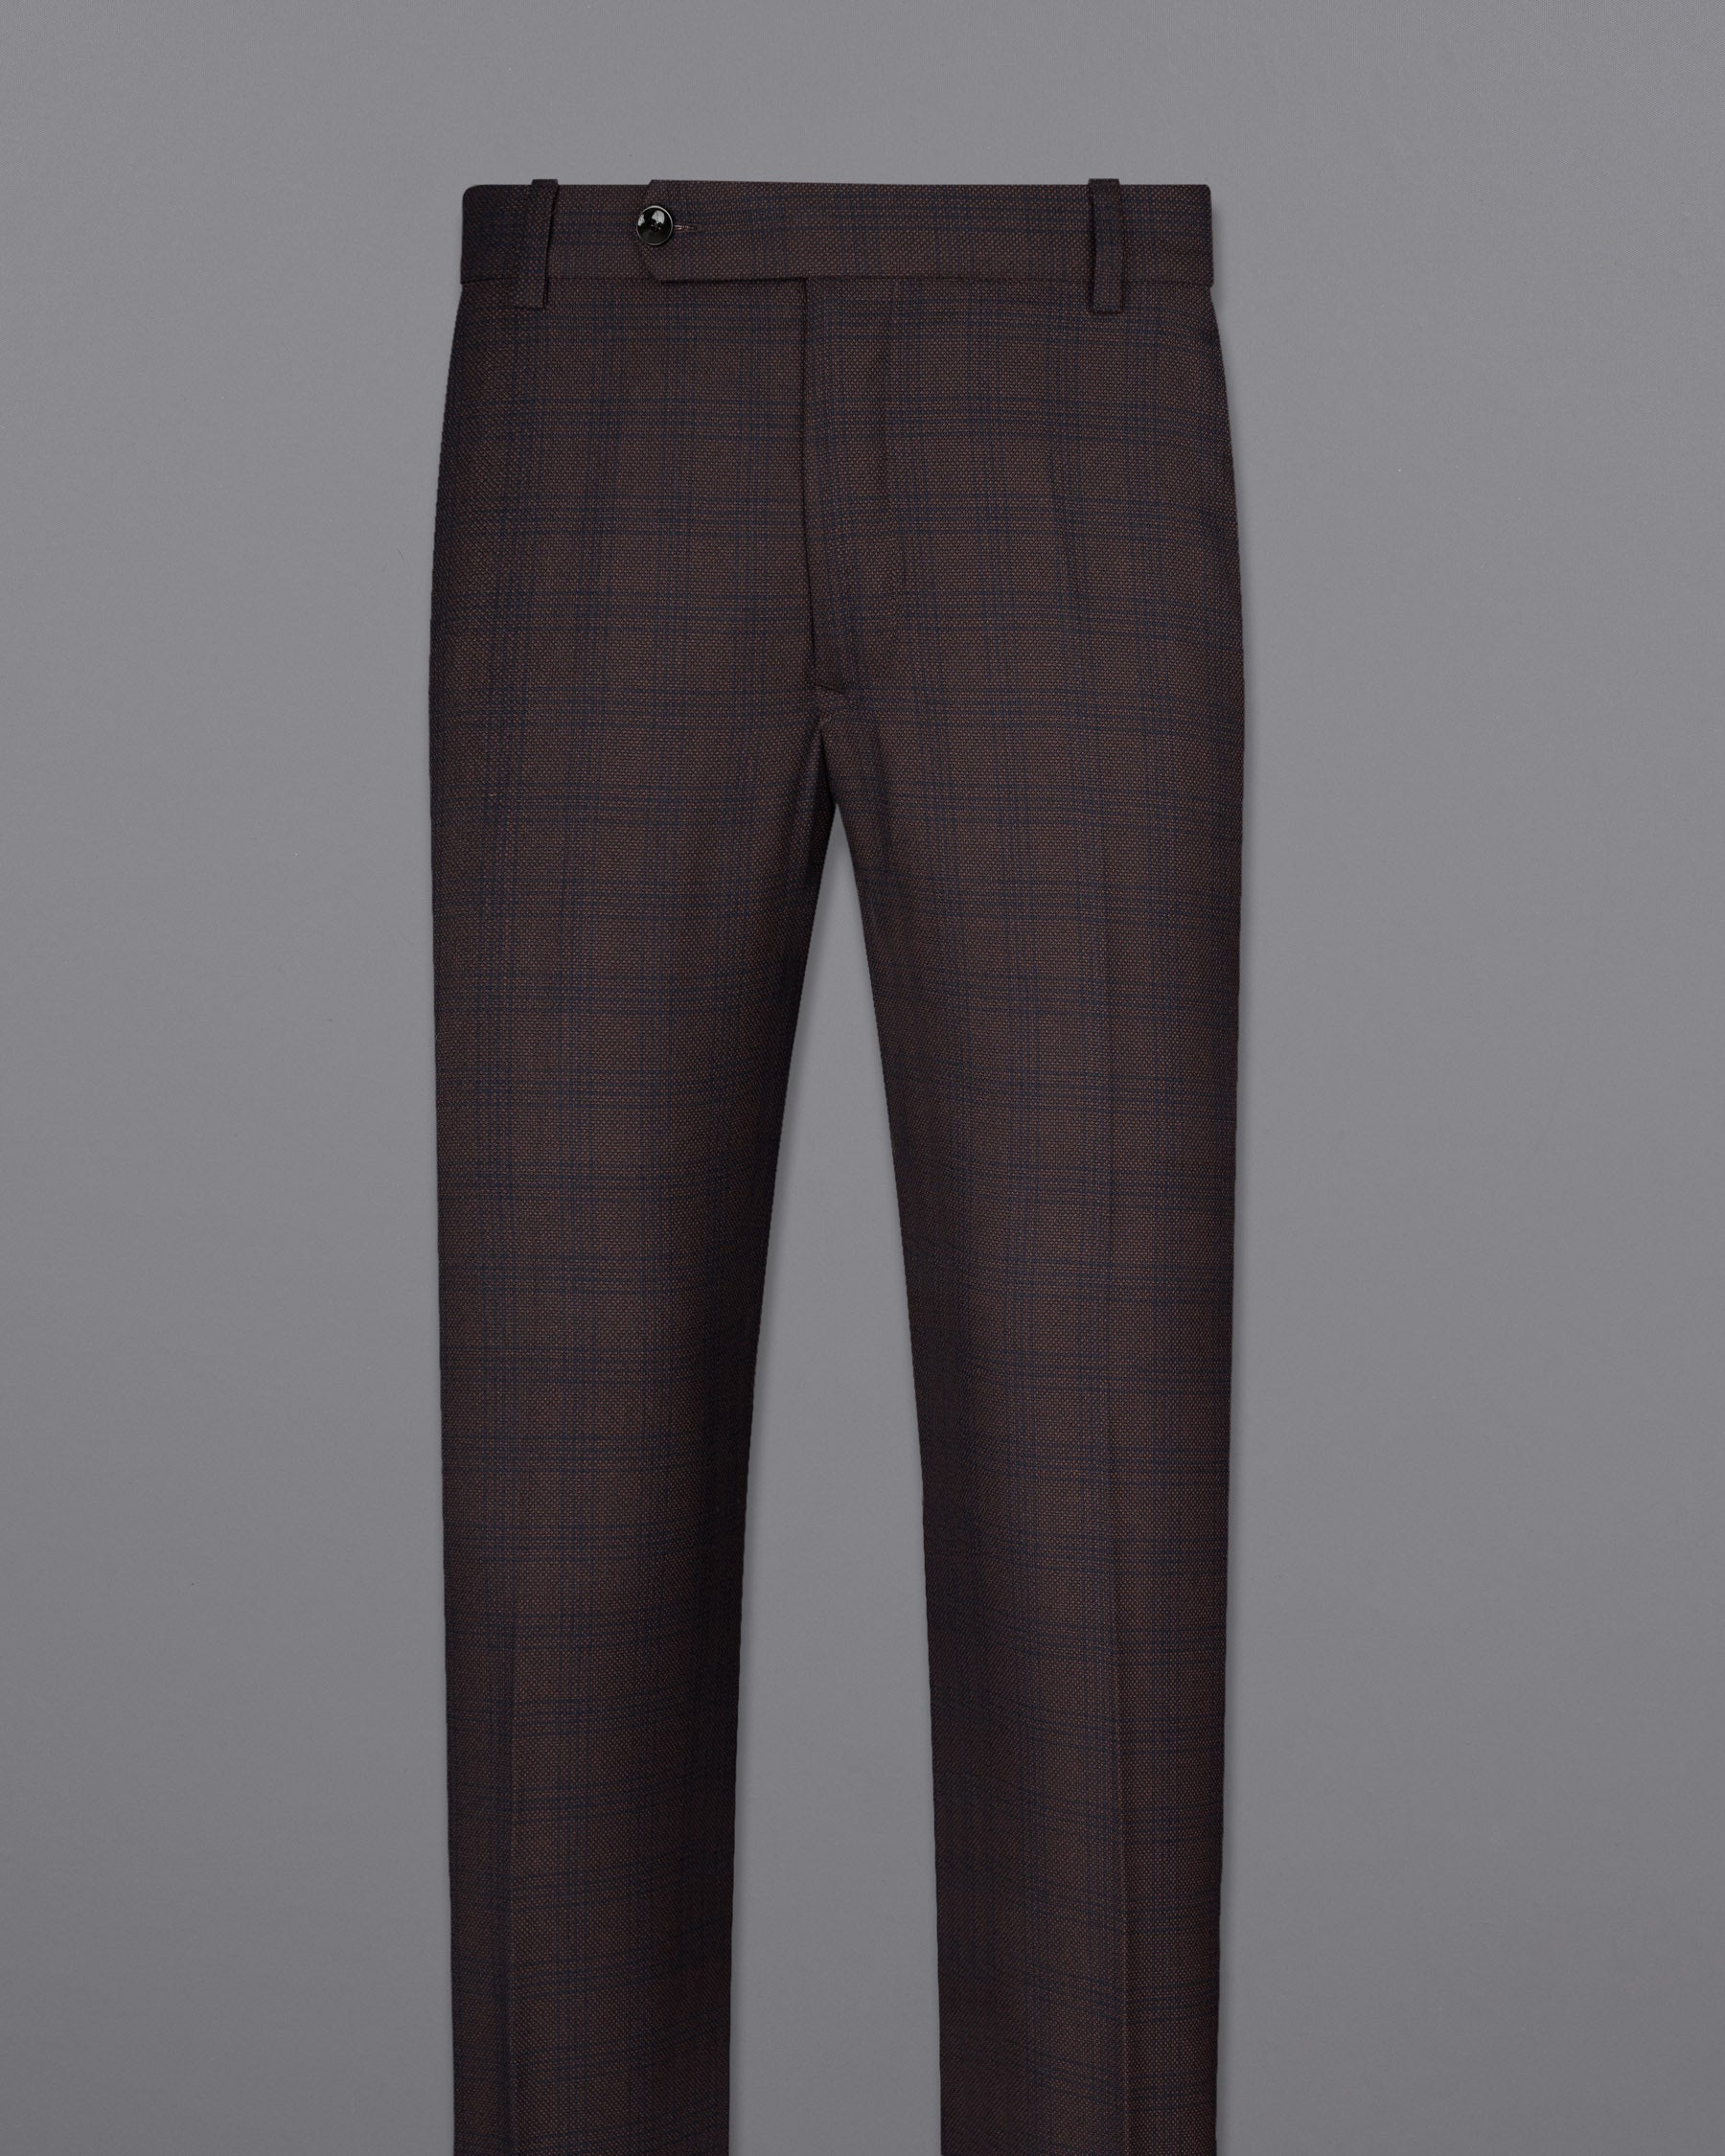 Thunder Brown Subtle Checkered Woolrich Pant T1625-28, T1625-30, T1625-32, T1625-34, T1625-36, T1625-38, T1625-40, T1625-42, T1625-44